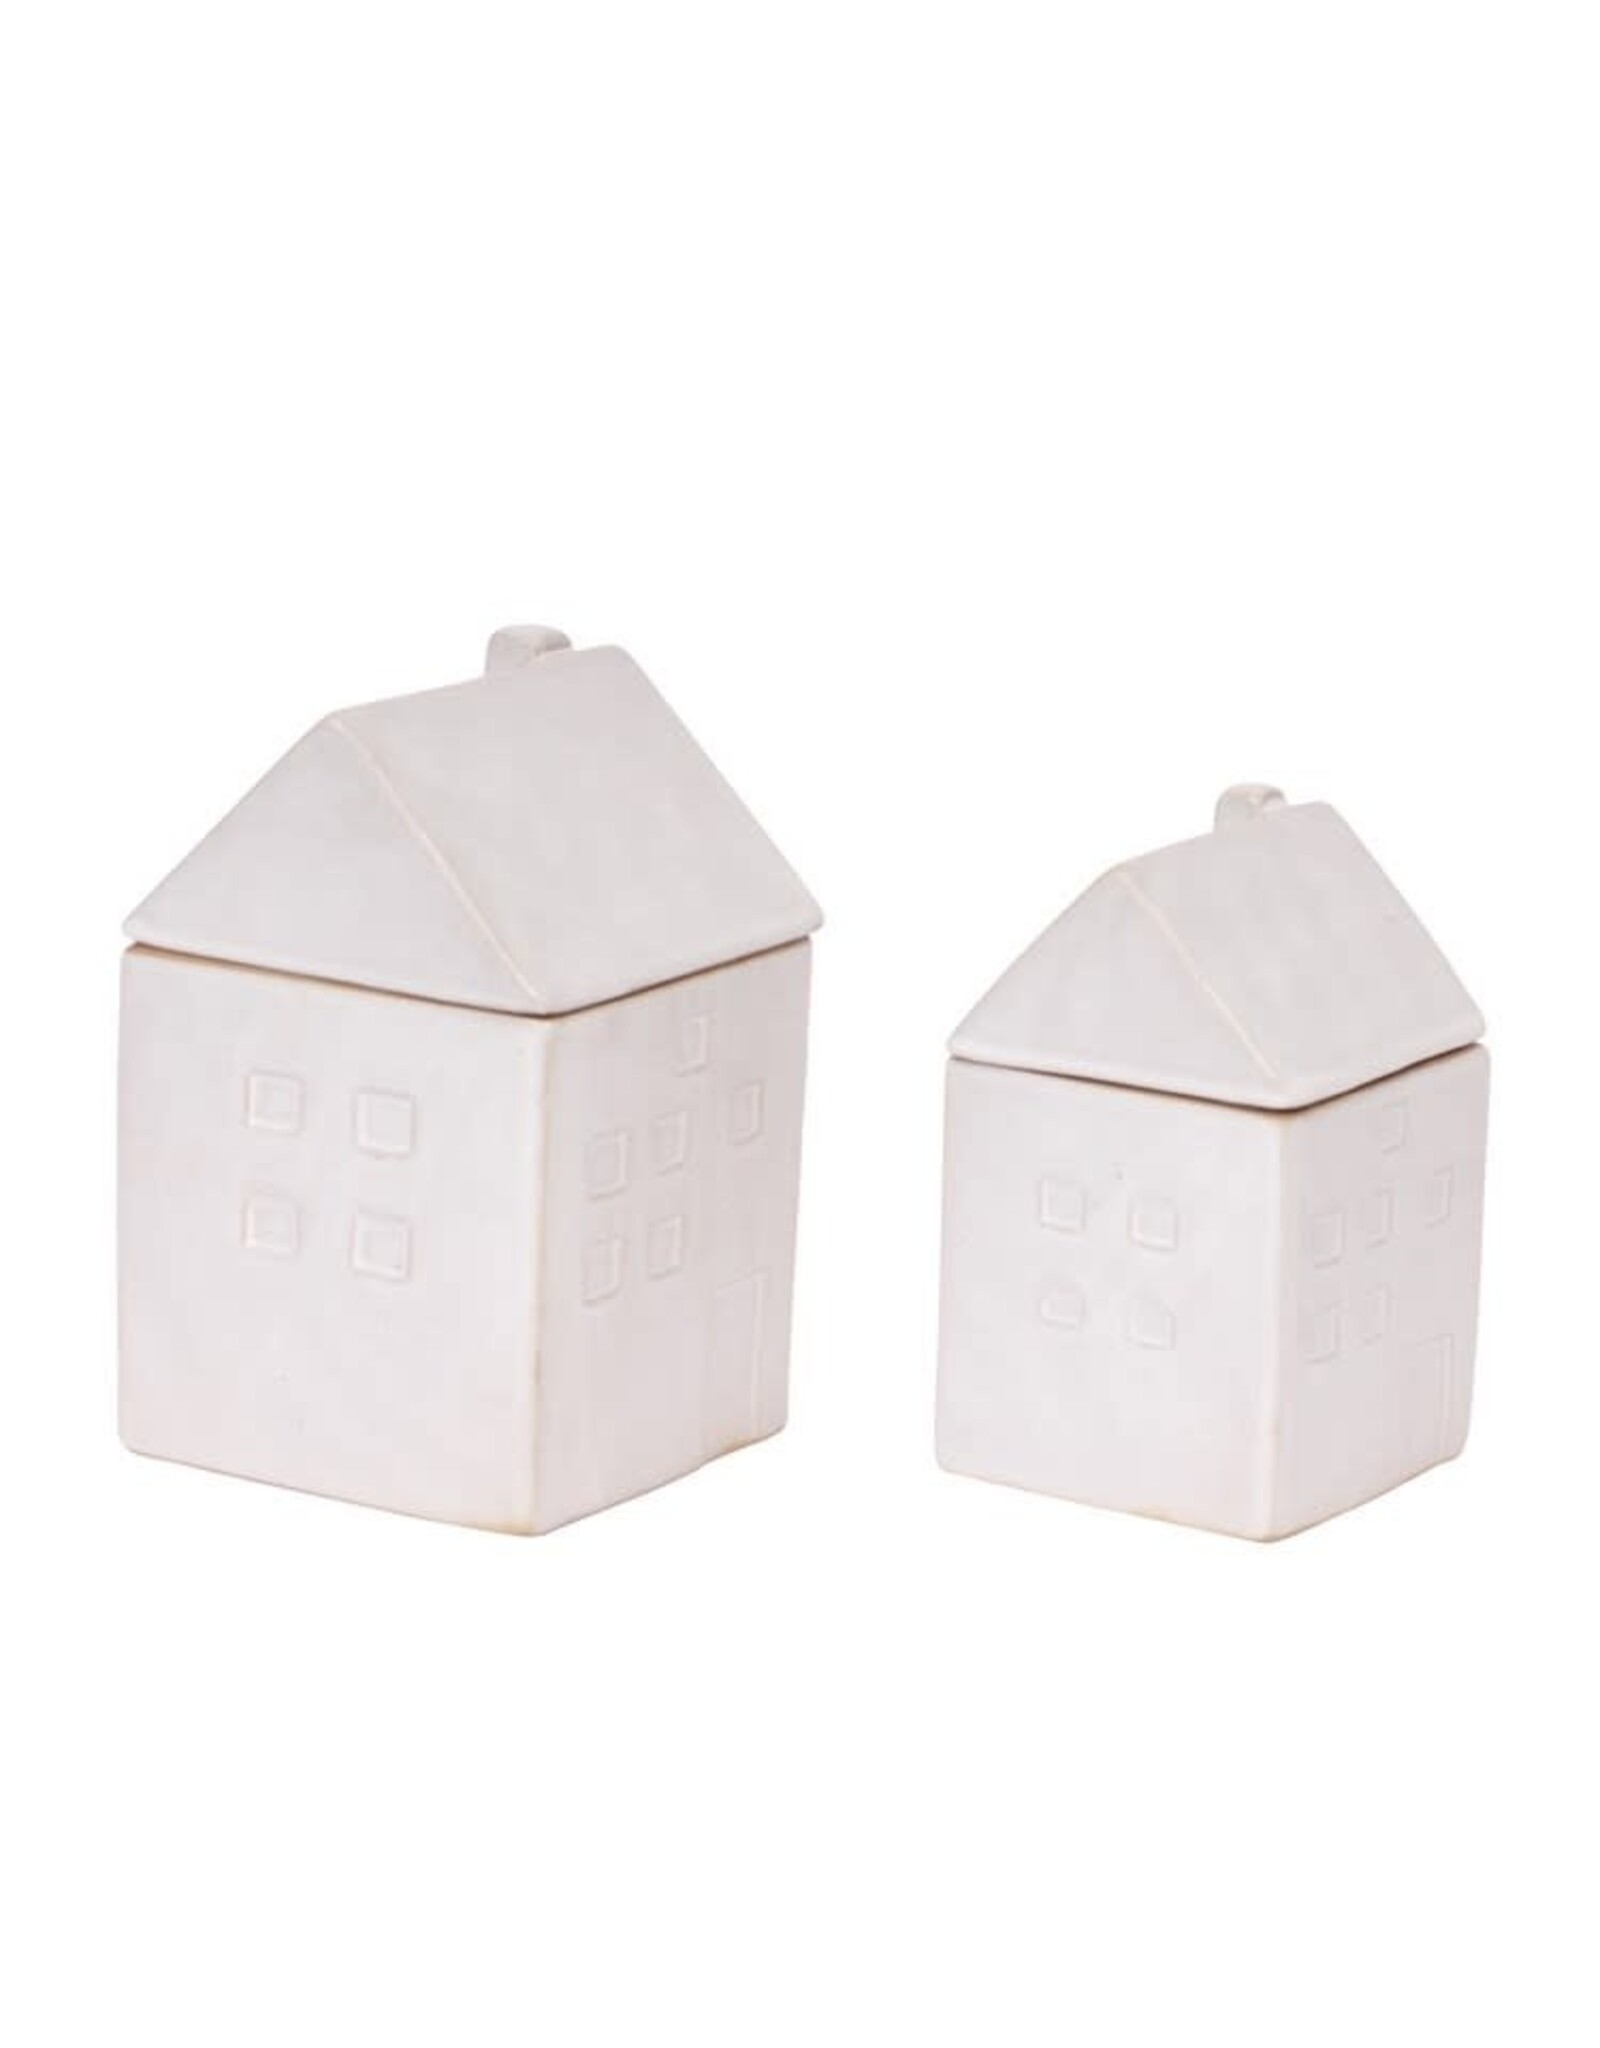 House Canisters Set of 2 White